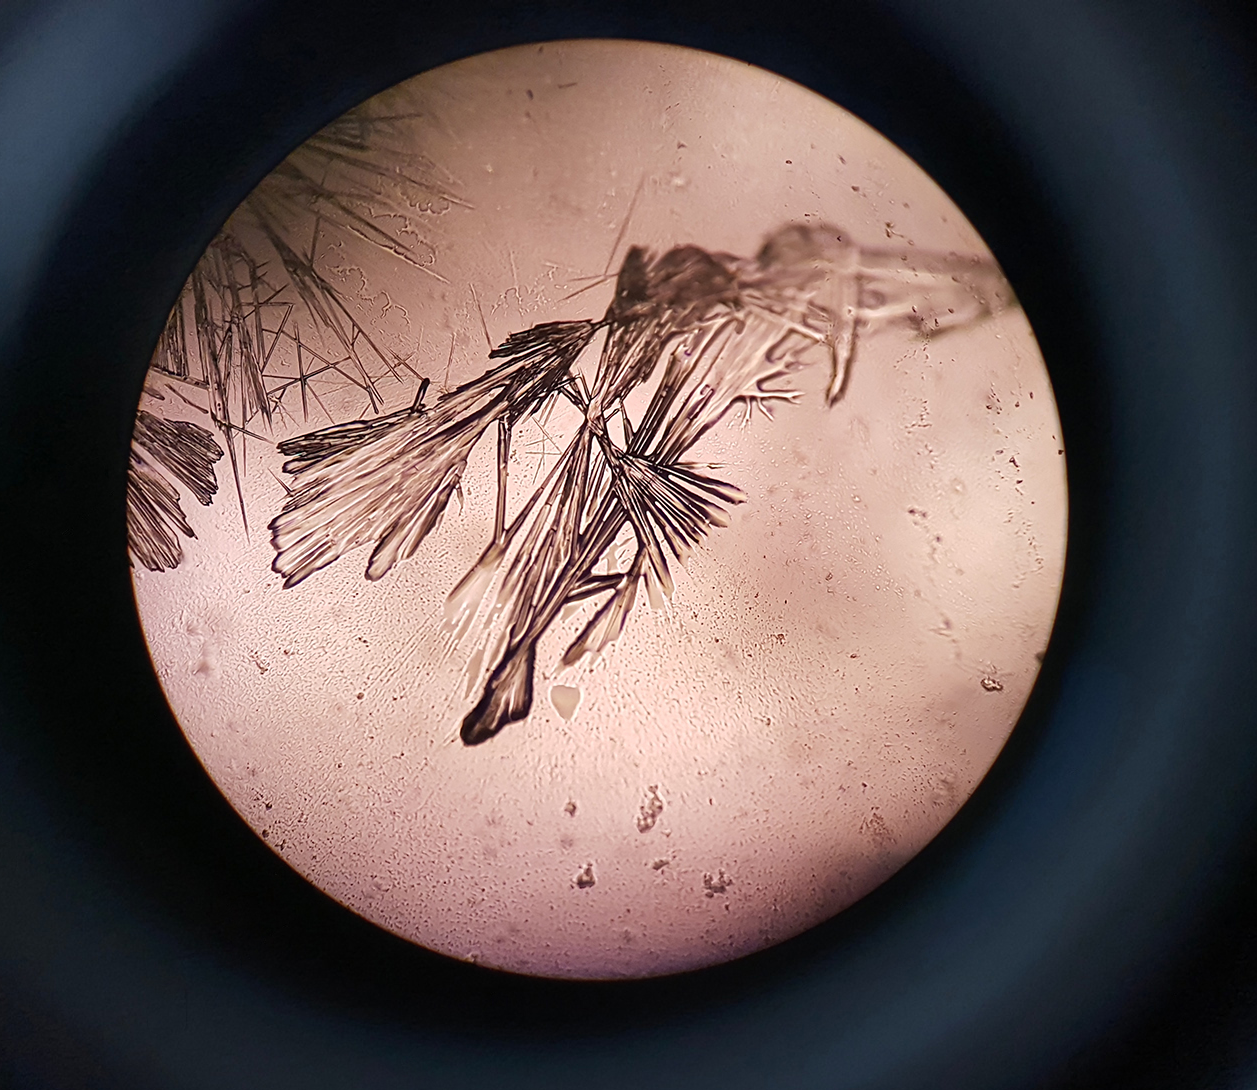 Psilocybin crystals under the microscope in 400x magnification